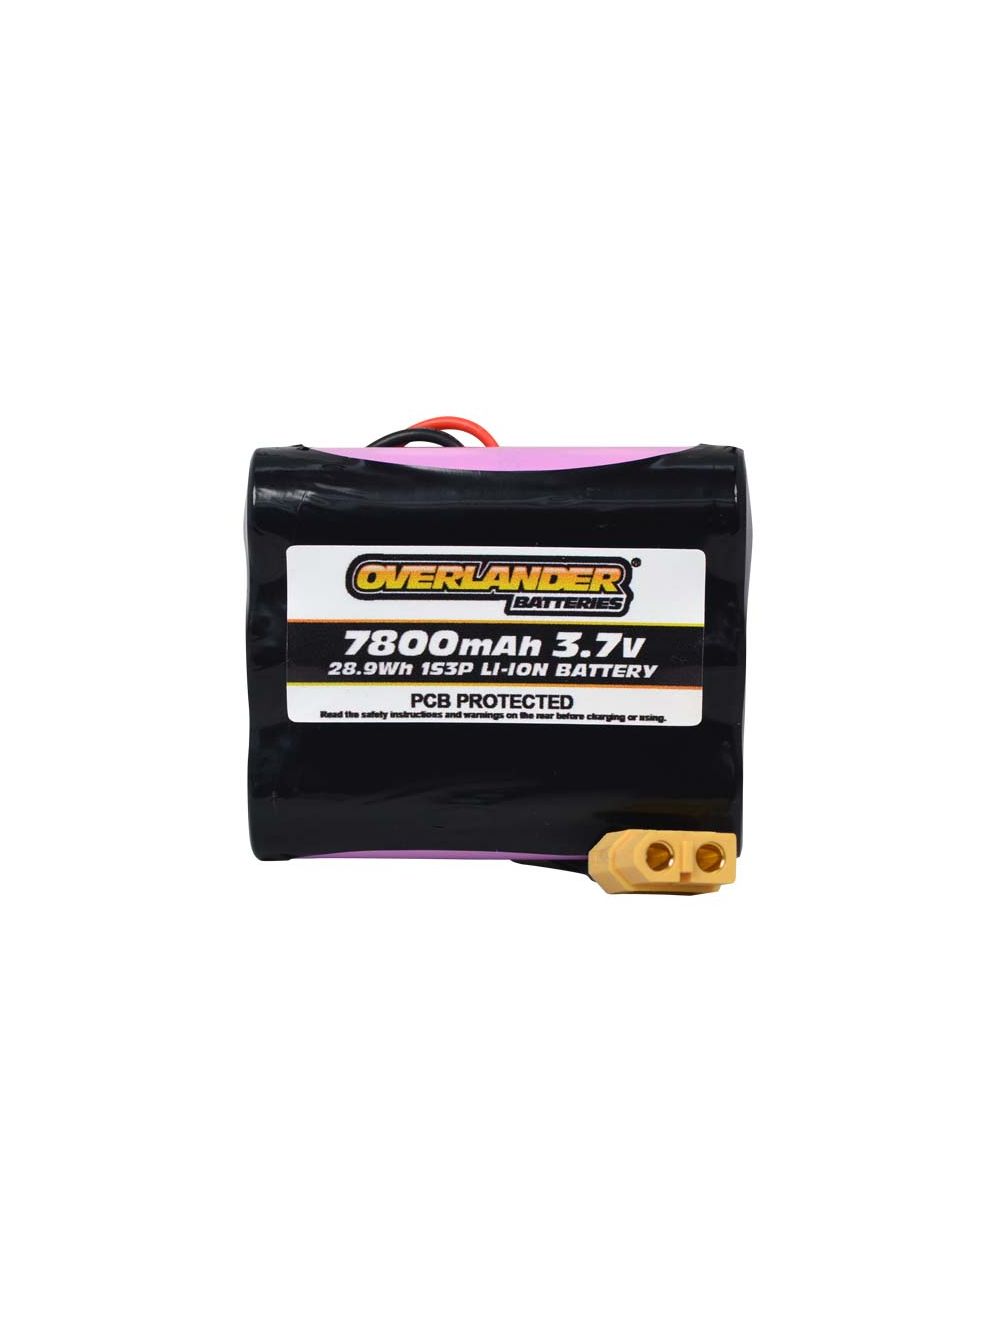 Overlander 7800mAh 1S3P 3.7V Li-Ion Rechargeable Battery with PCB 3310